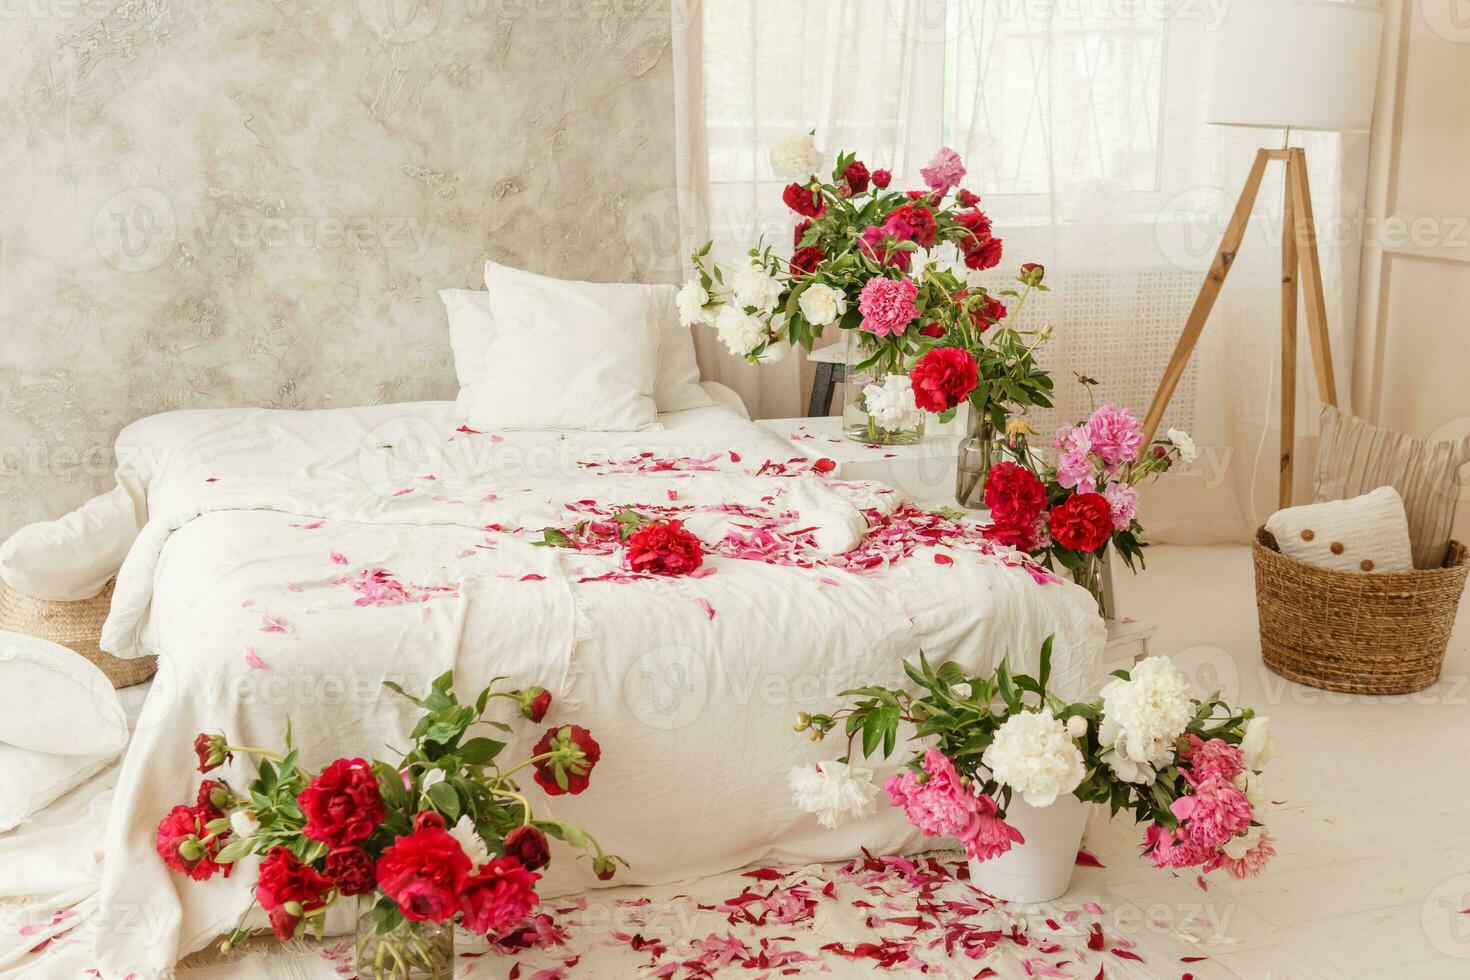 Large white bed in a bright room decorated with vases of bright peonies. Bedroom interior decorated with spring pink flowers. photo